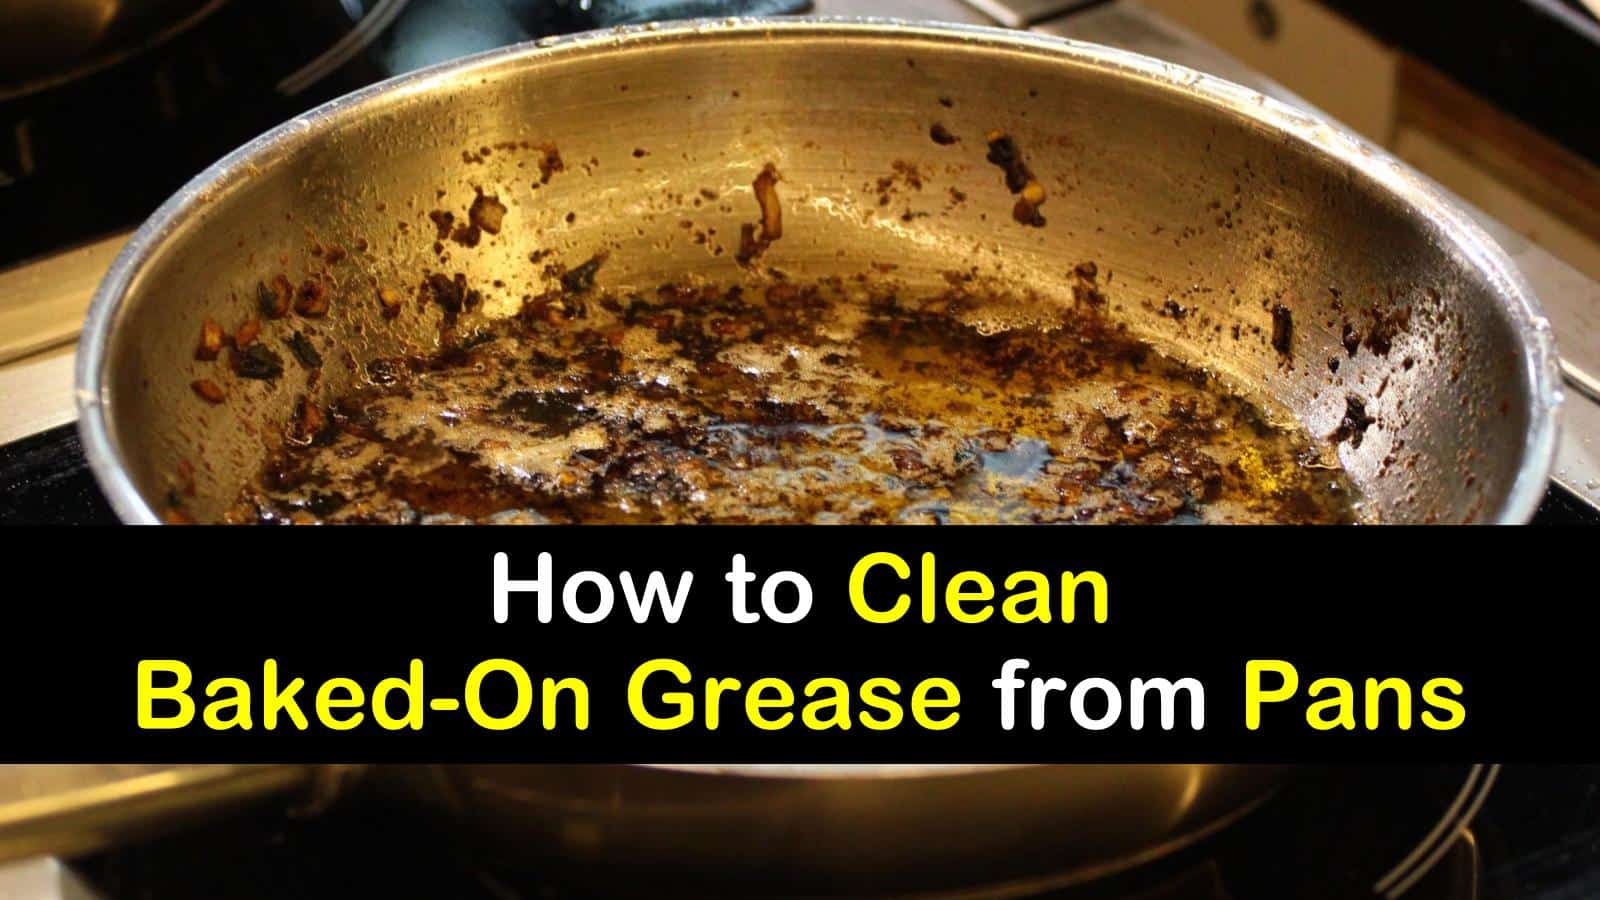 how to clean baked-on grease from pans titleimg1